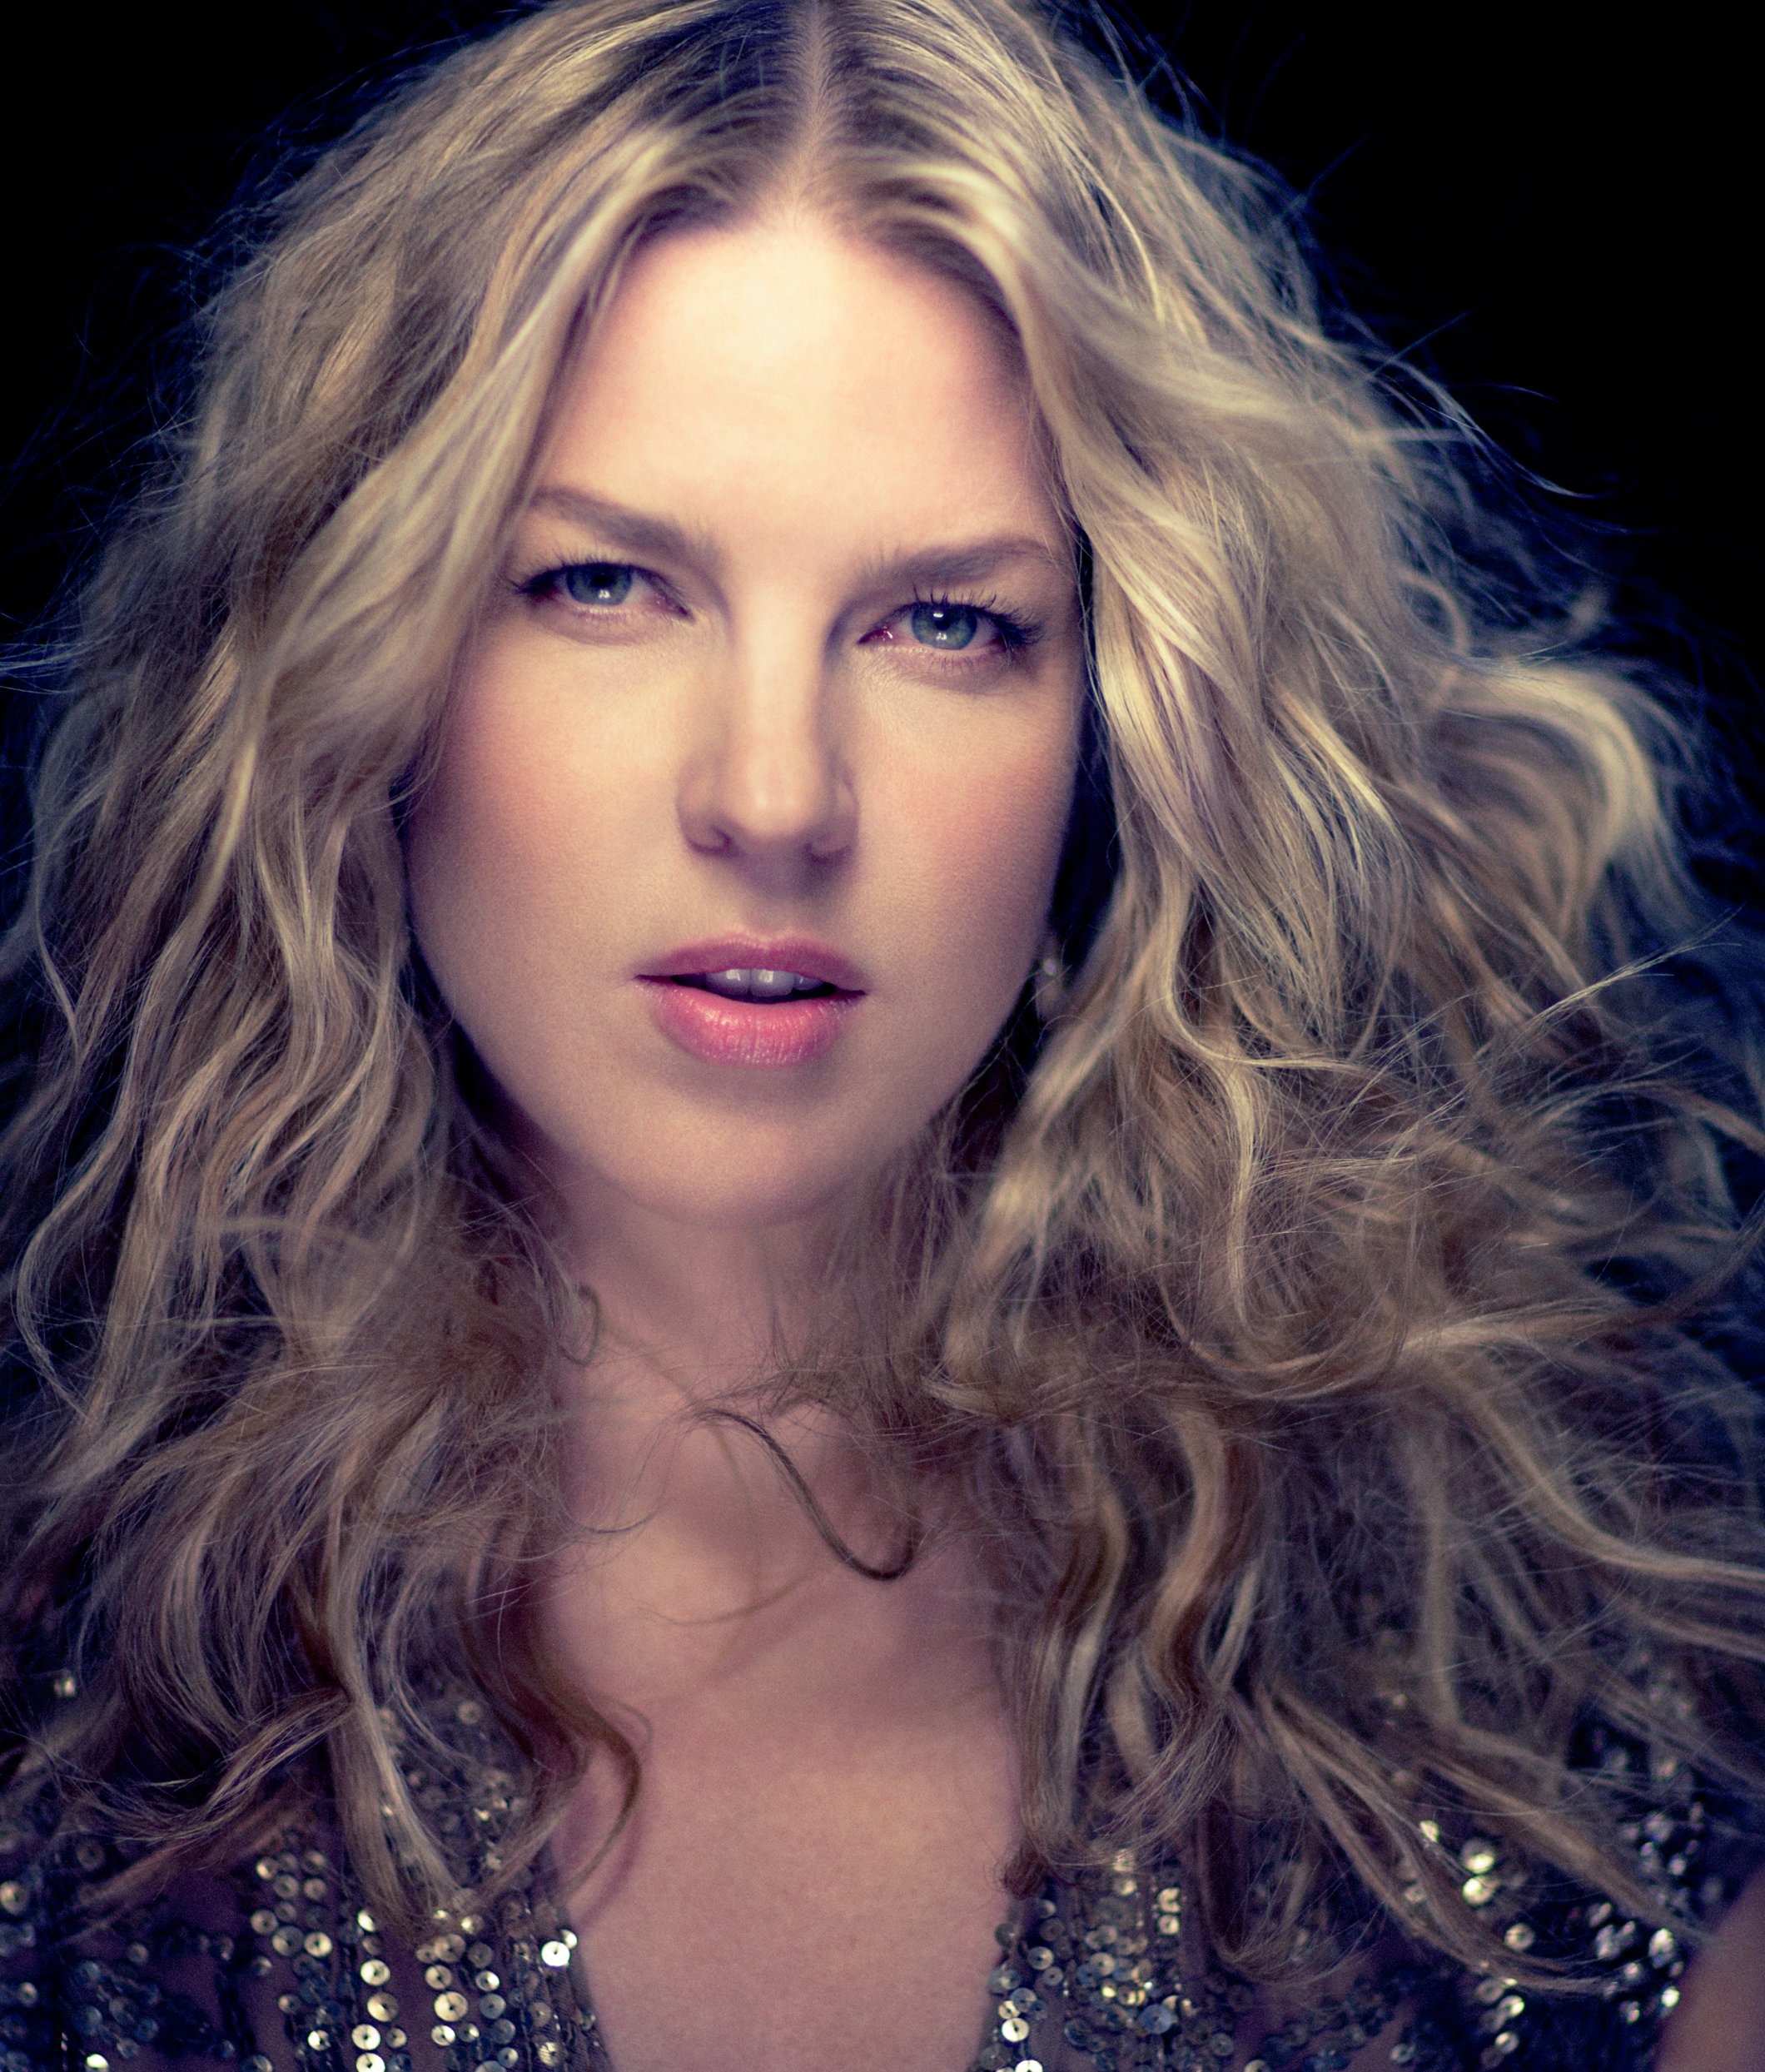 Diana Krall Backgrounds, Compatible - PC, Mobile, Gadgets| 2120x2489 px